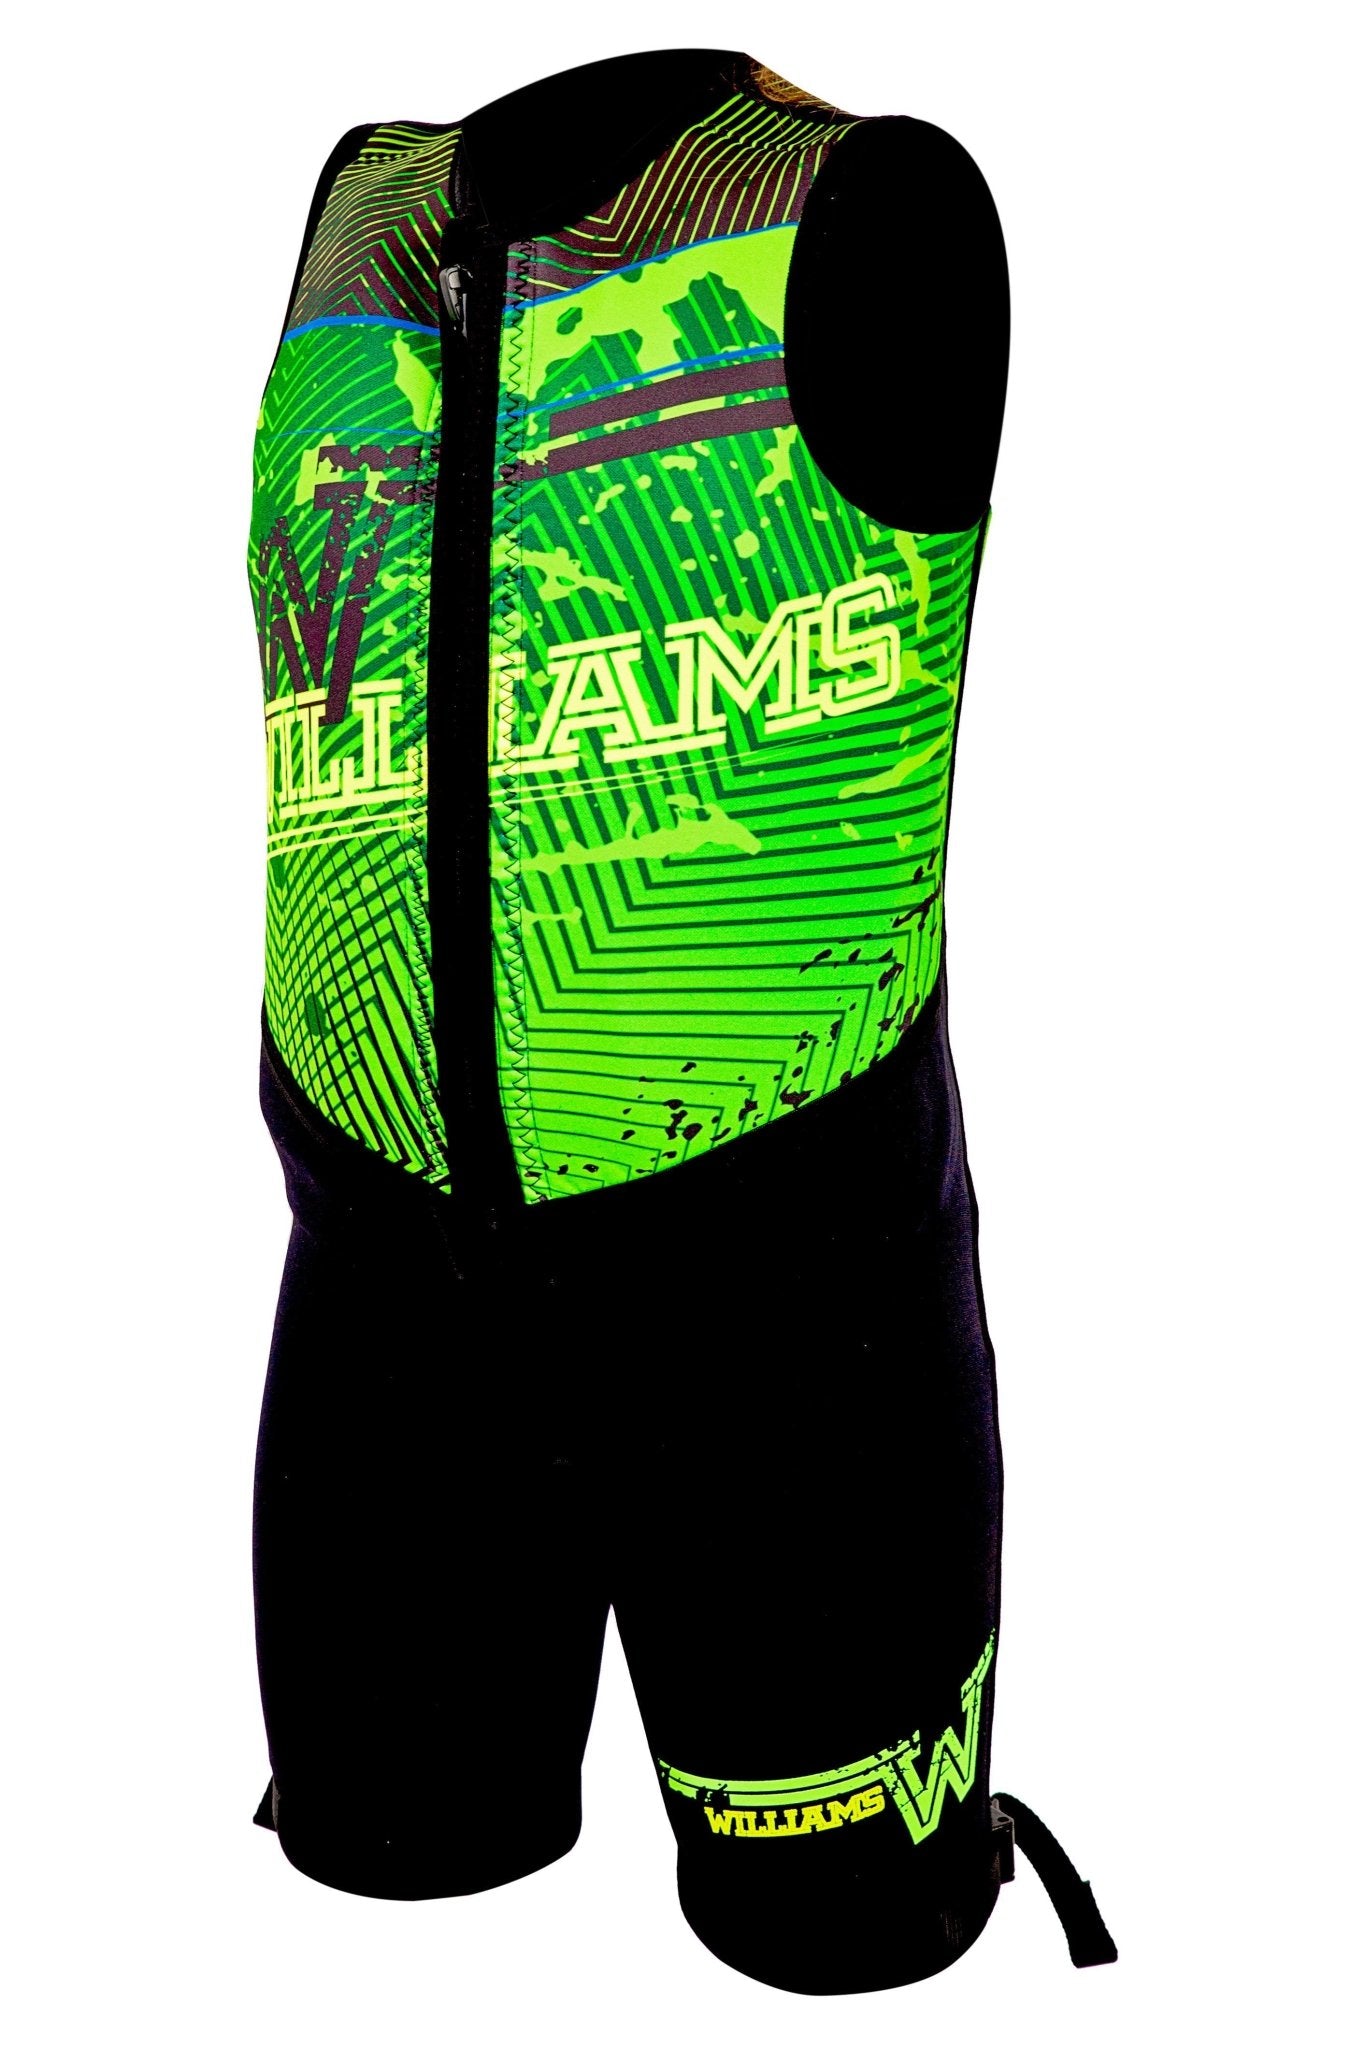 Youth Bouyancy Suit -Williams208240-8-Black/Green